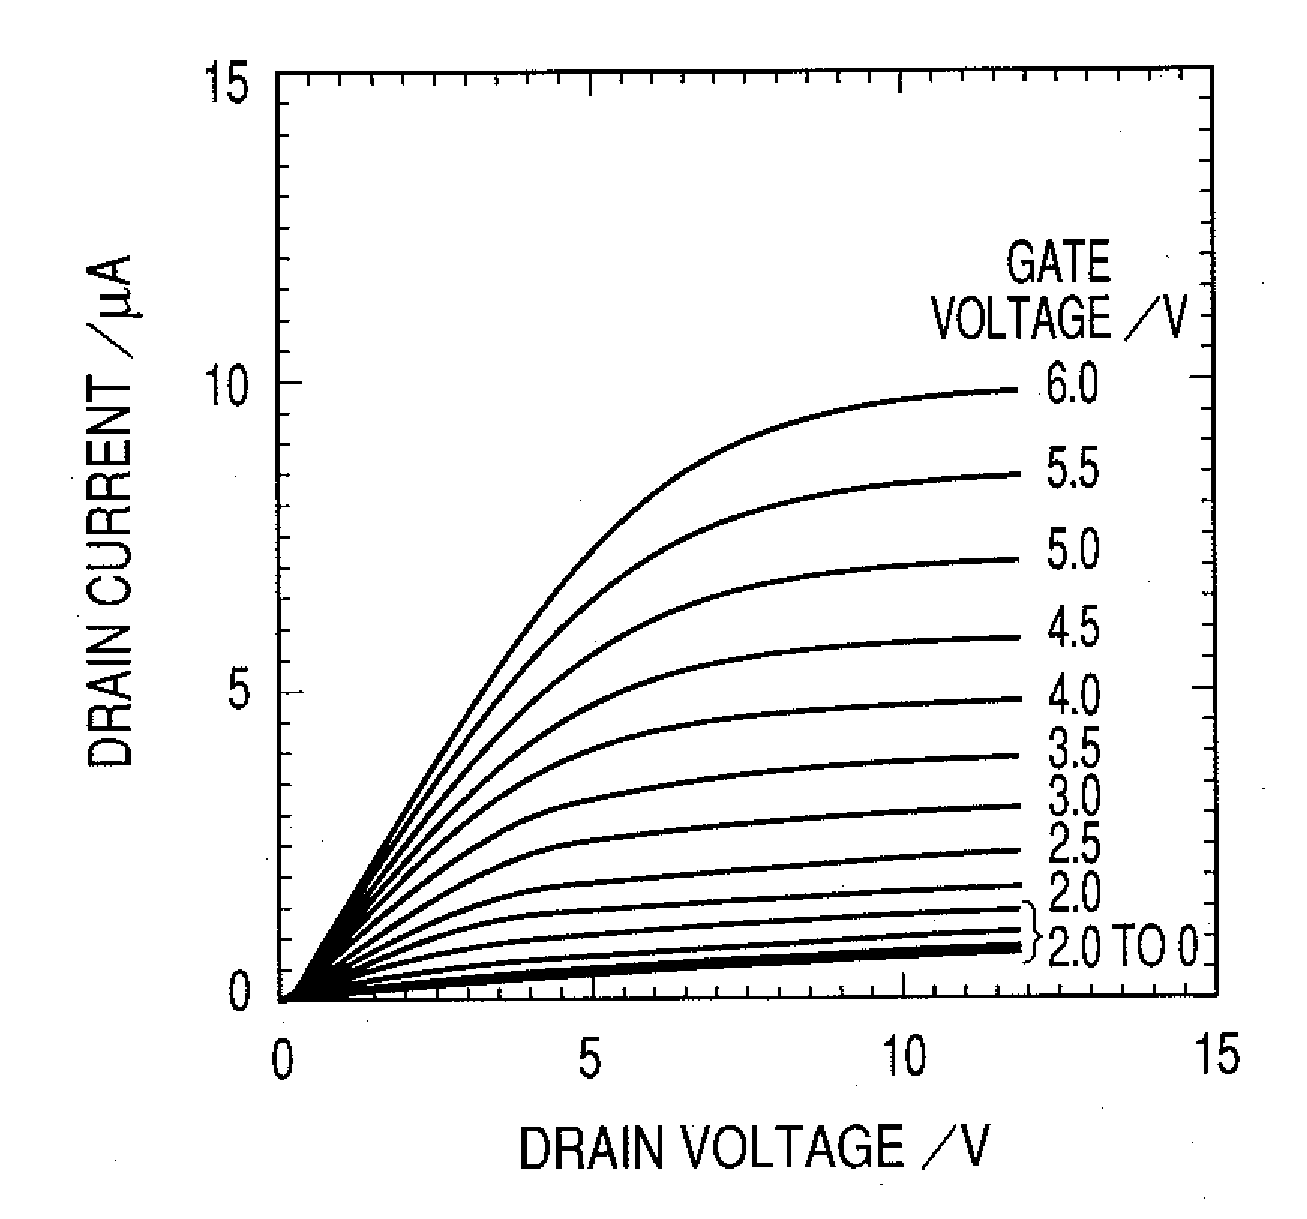 Field effect transistor with amorphous oxide layer containing microcrystals